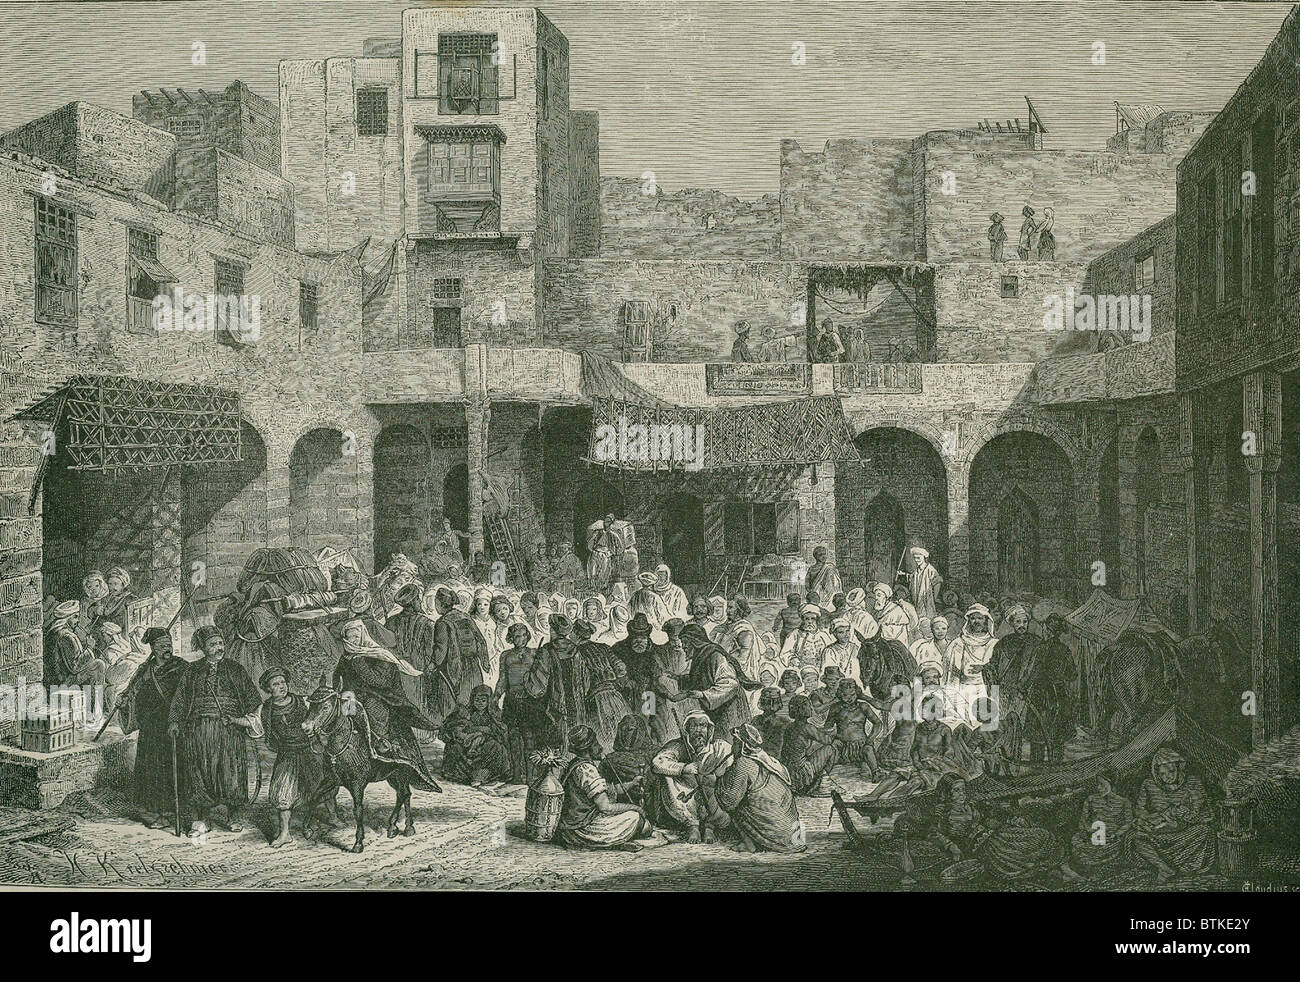 Slave market in Cairo, Egypt 1885.  Most 19th century urban Egyptian slaves worked as domestic servants. Stock Photo